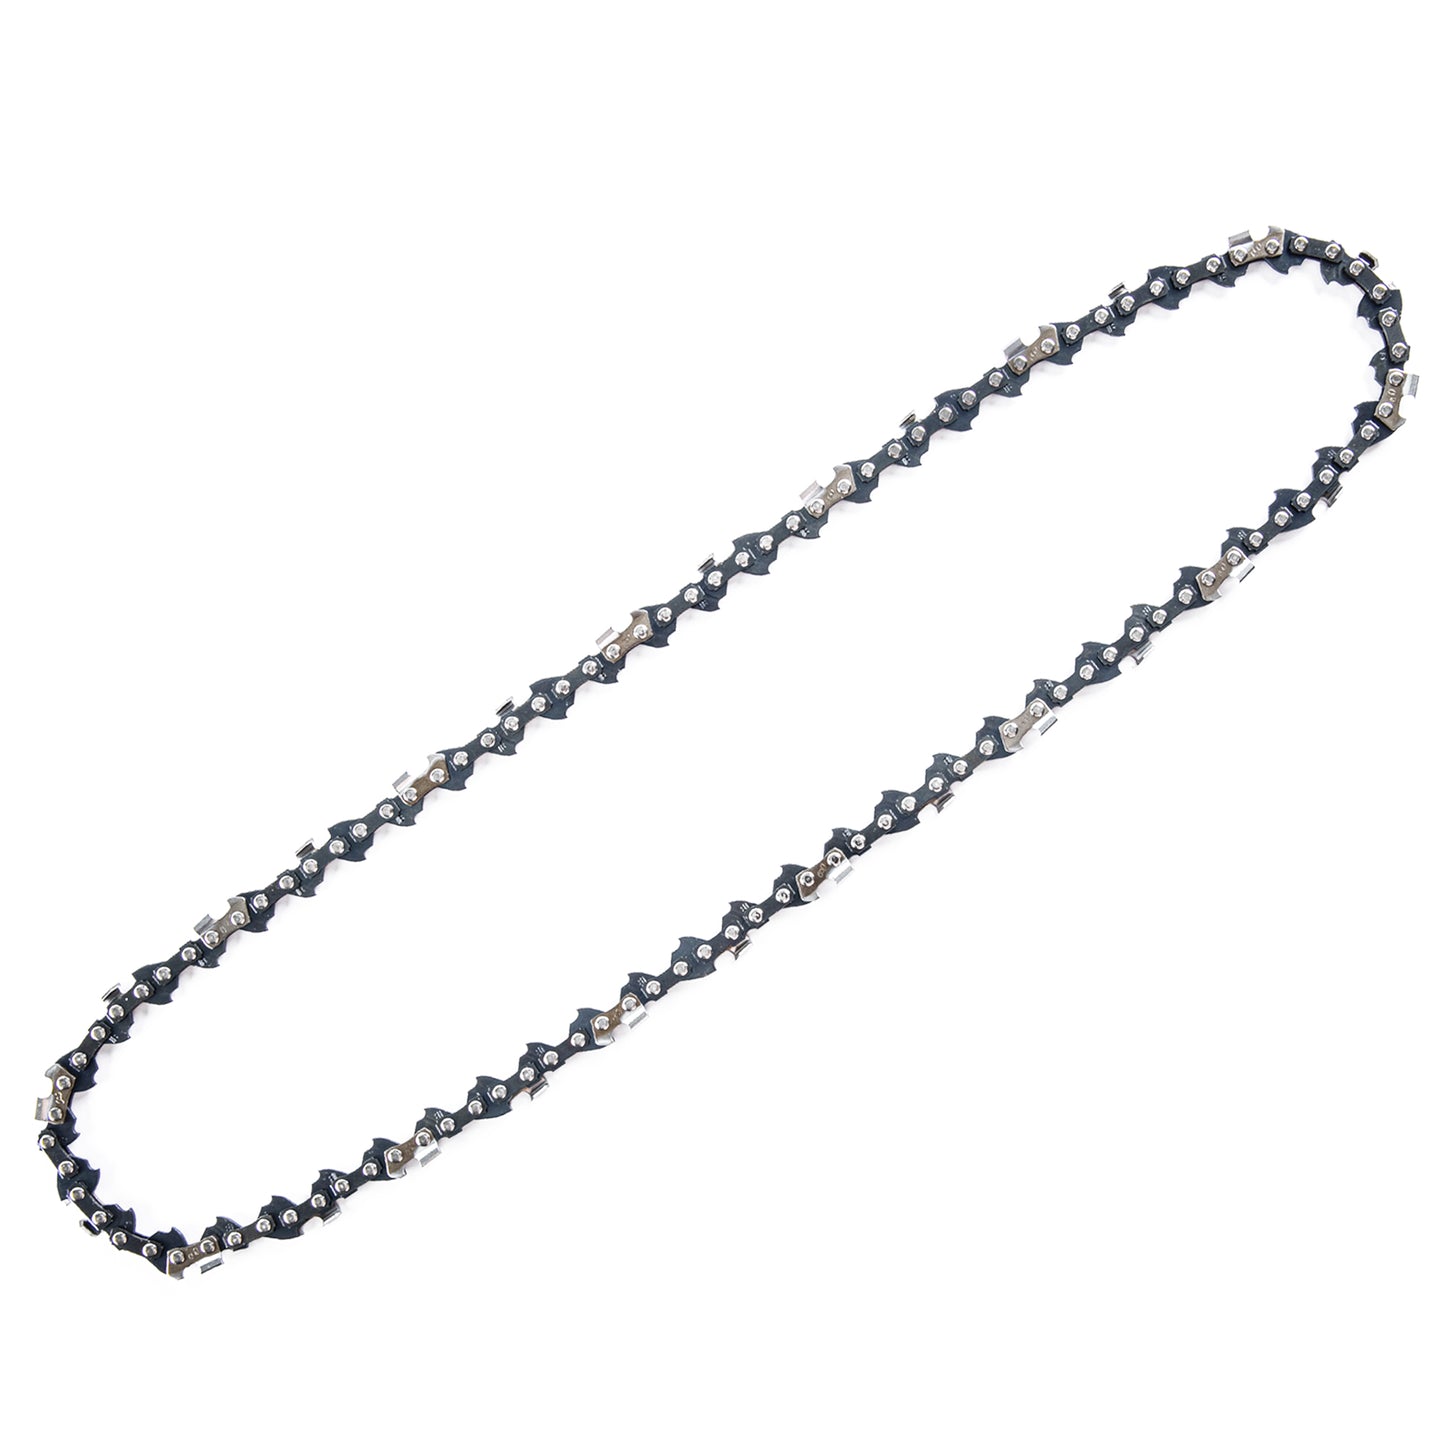 8-Inch Replacement Pole Saw Chain